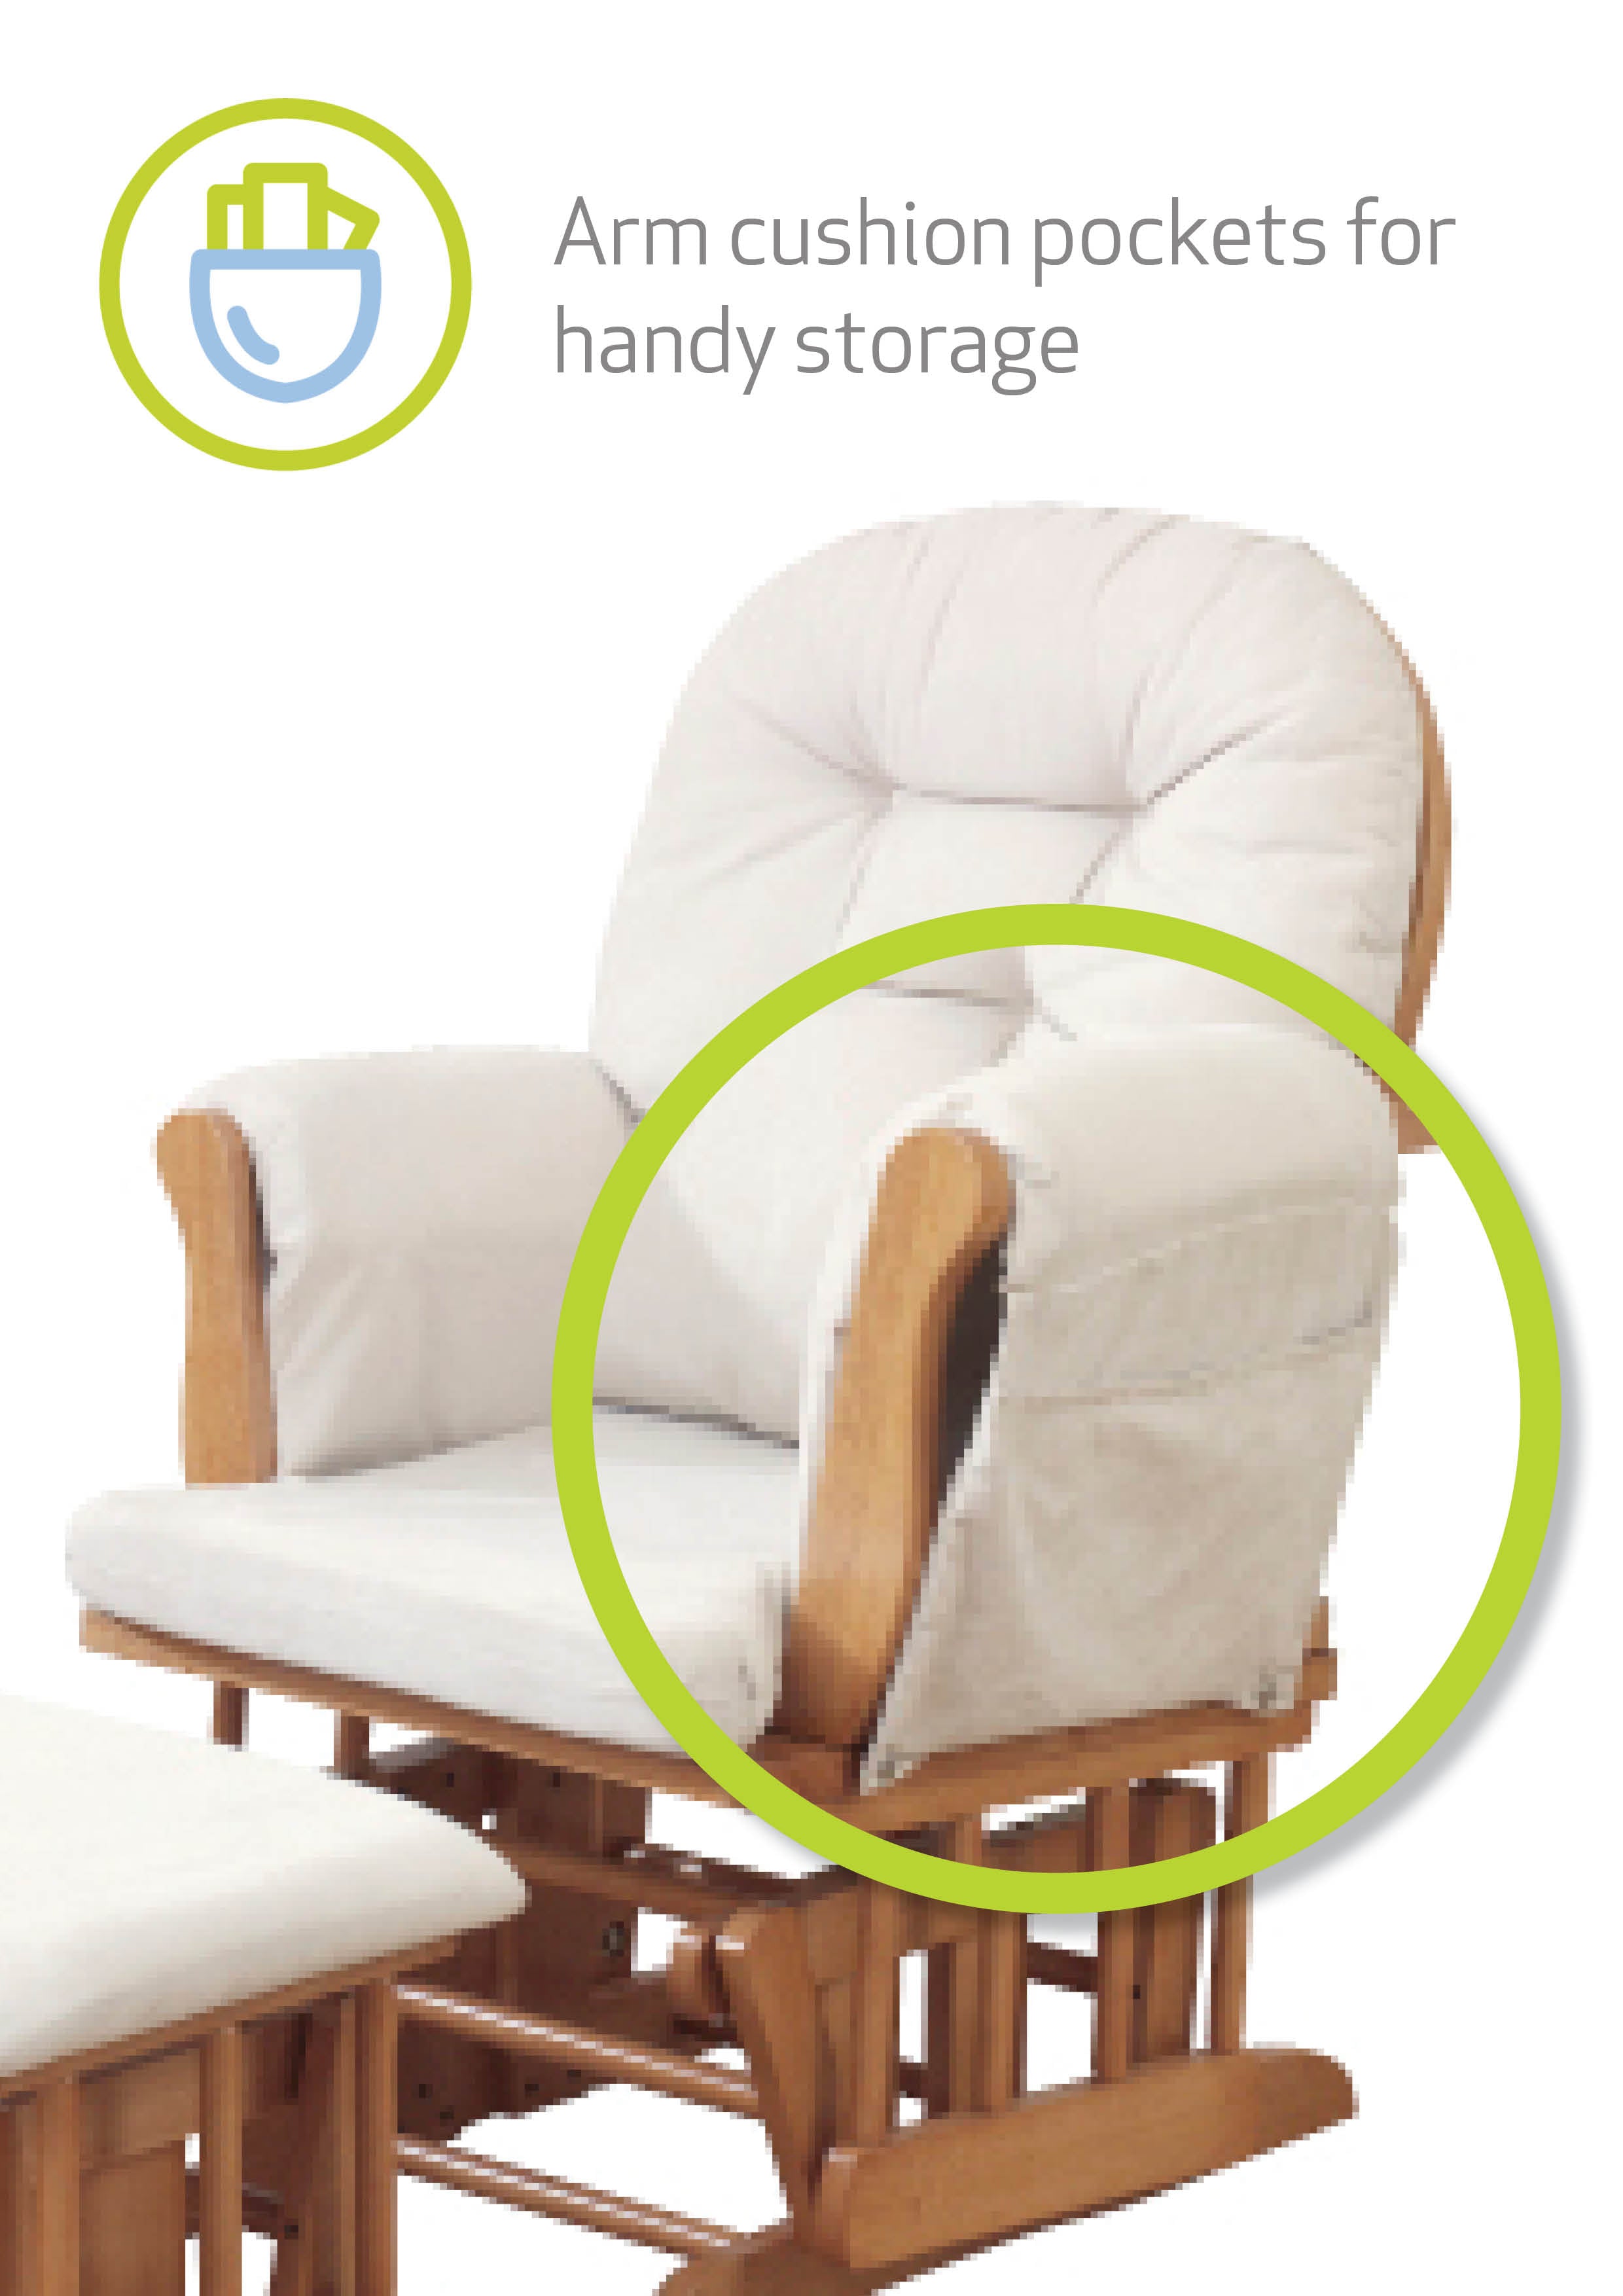 Haywood Nursing Chair and Footstool - 15% OFF Applied at Checkout